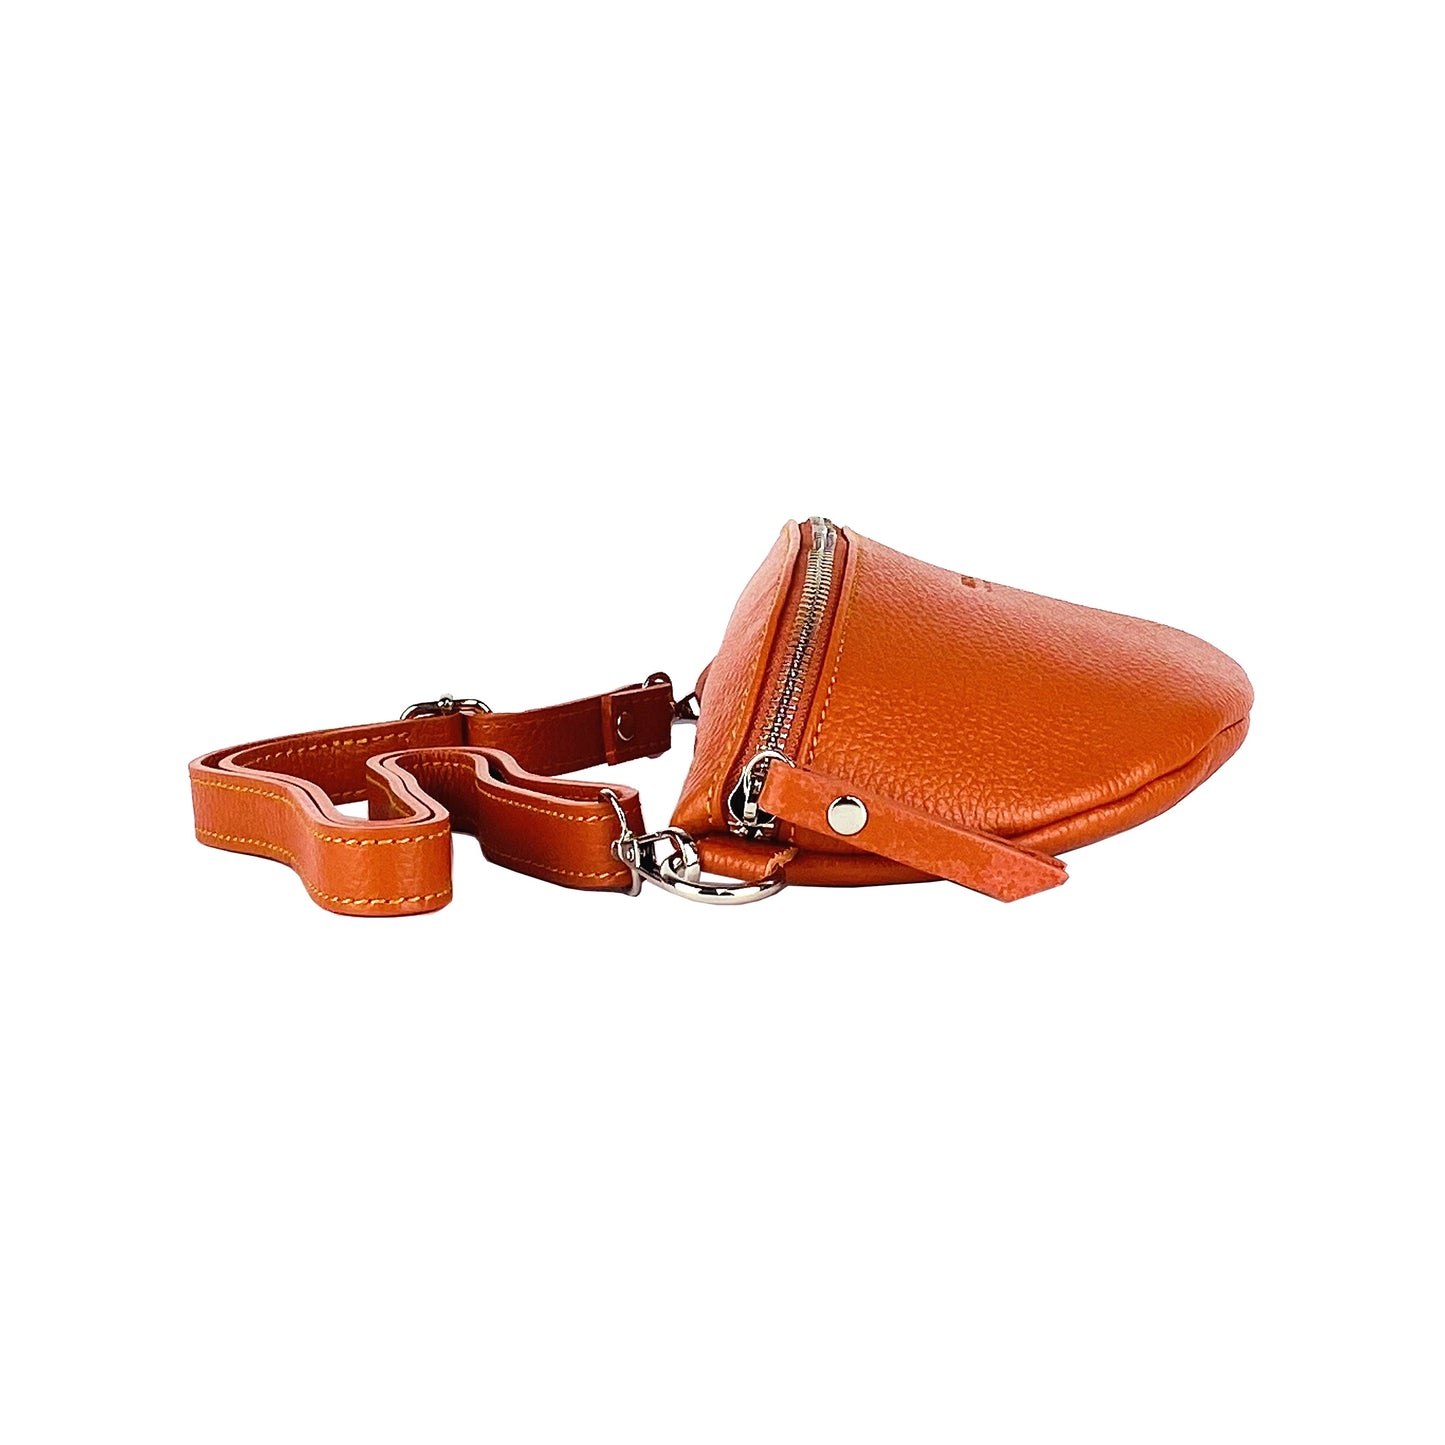 RB1015L | Waist bag with removable shoulder strap in Genuine Leather Made in Italy. Attachments with shiny nickel metal snap hooks - Orange color - Dimensions: 24 x 14 x 7-5